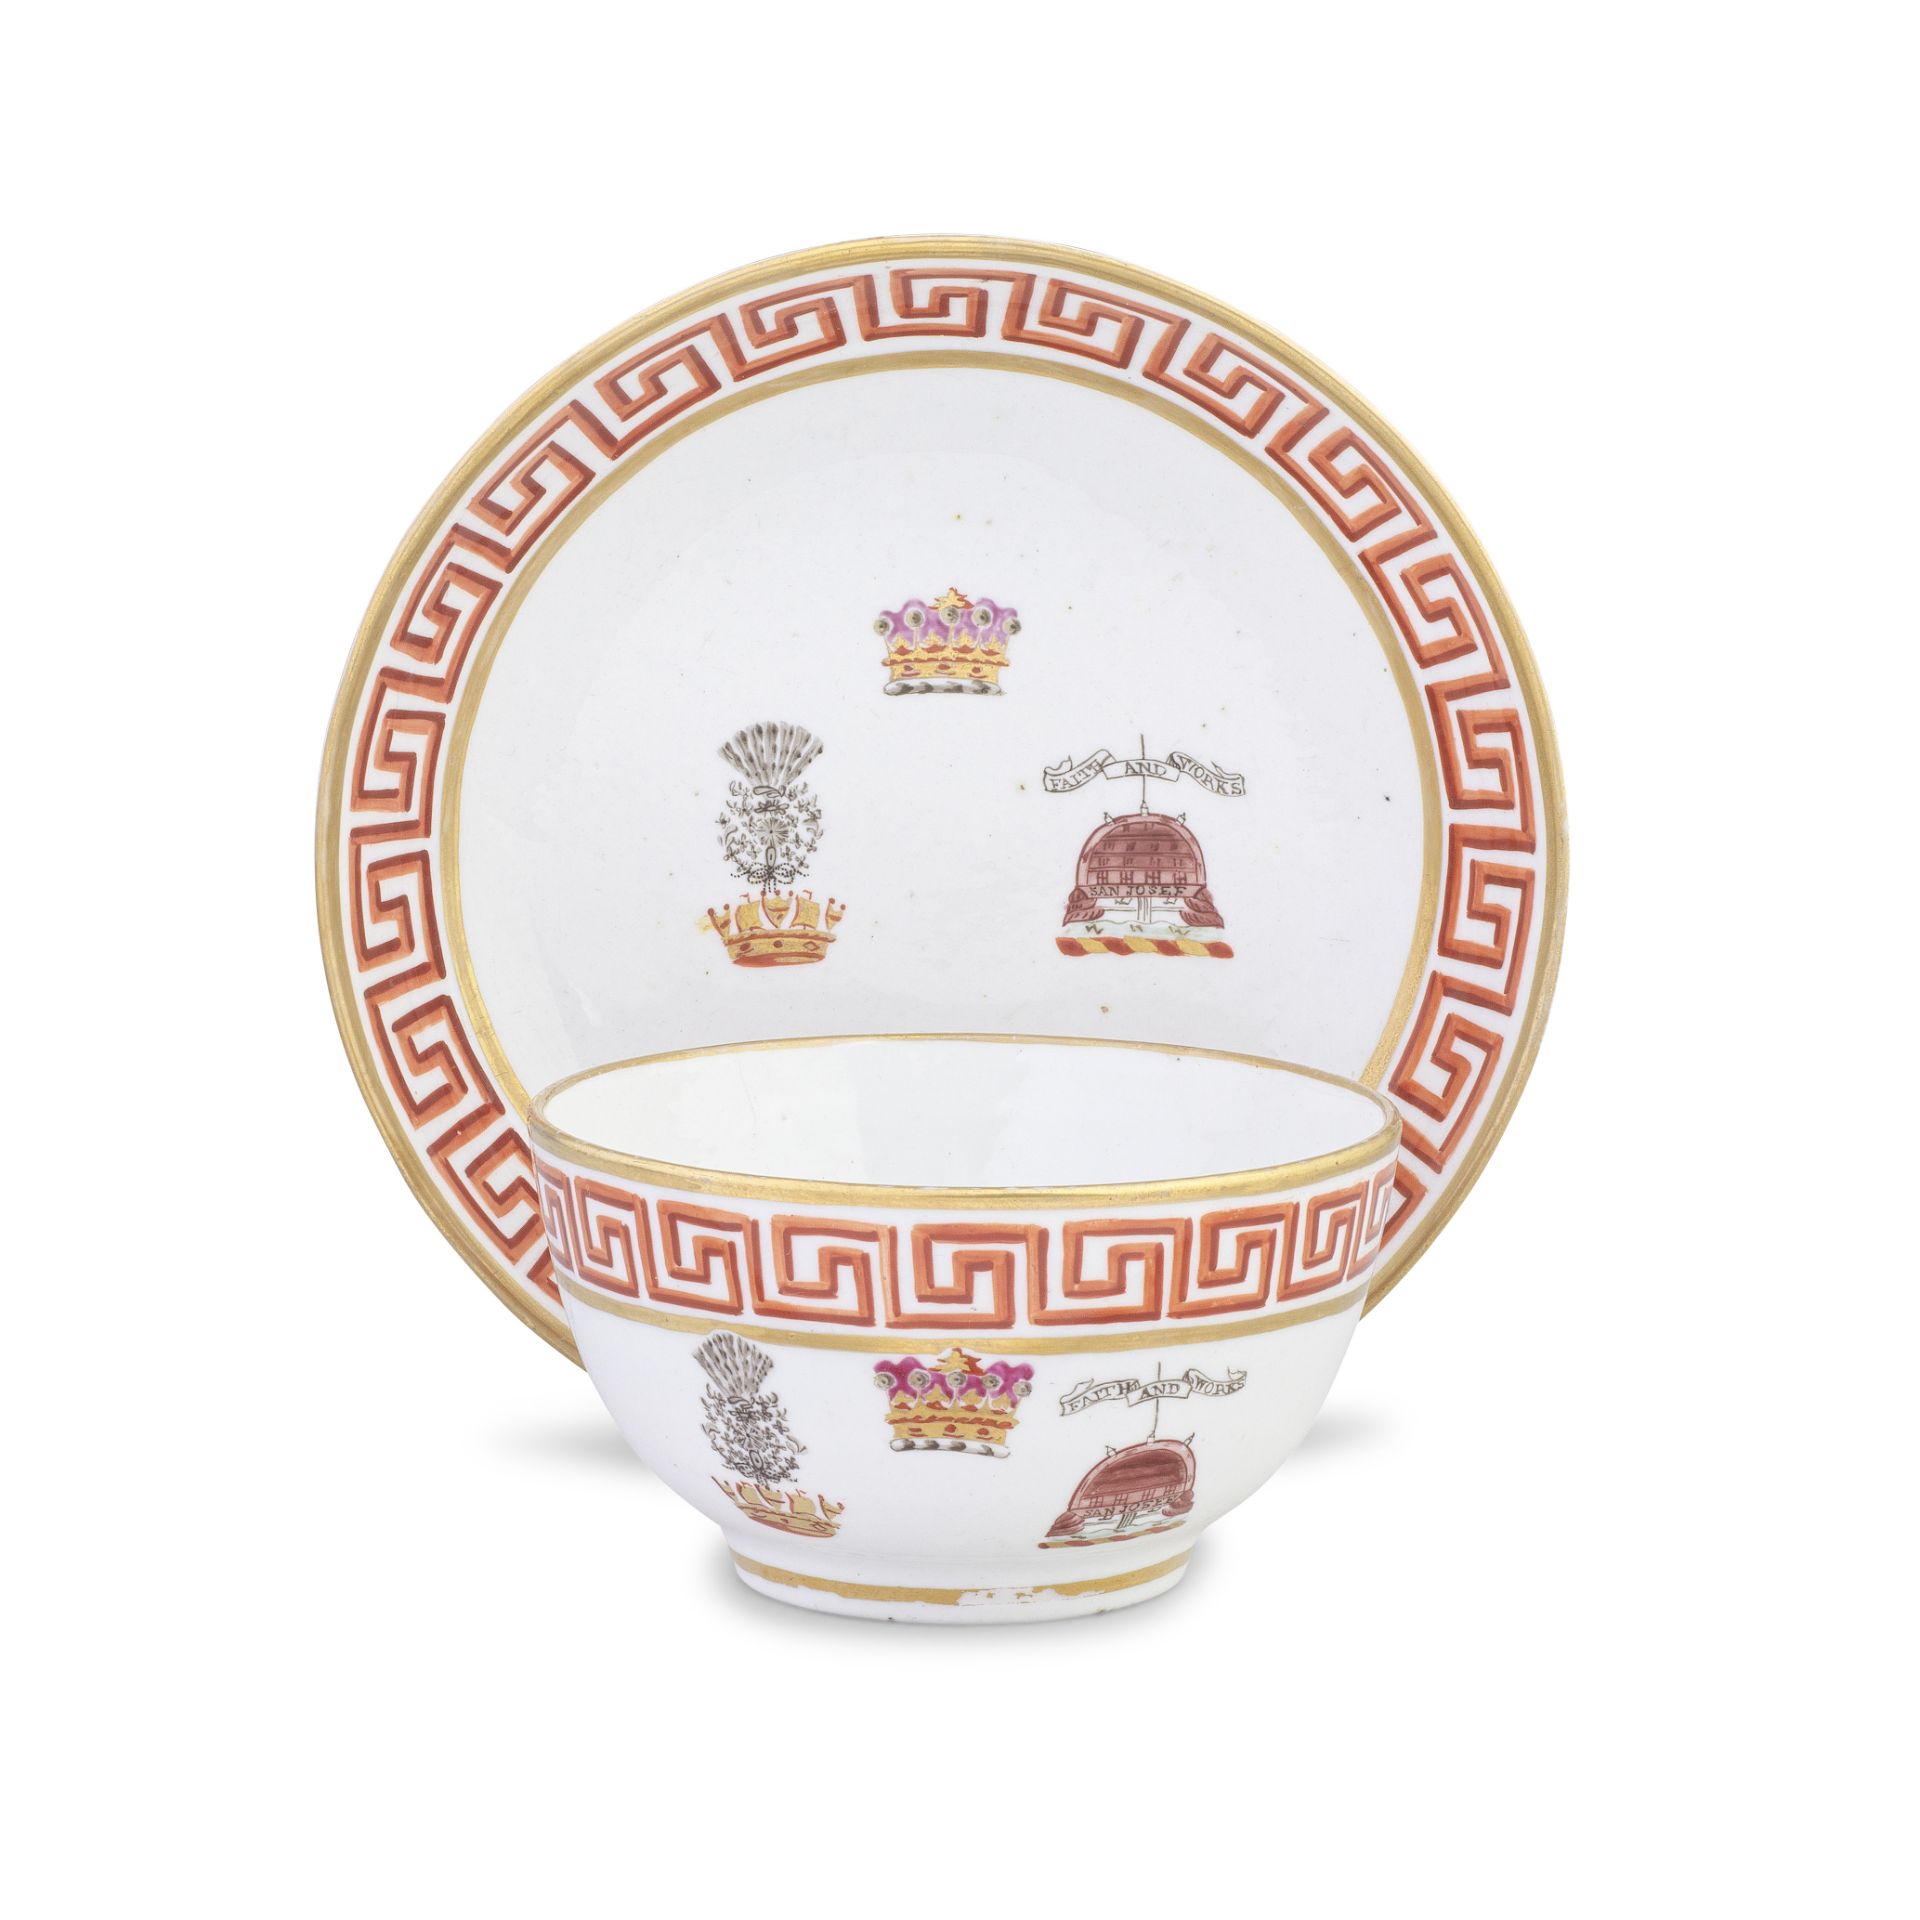 A Coalport breakfast cup and saucer from the Reverend William Nelson service, circa 1806-08